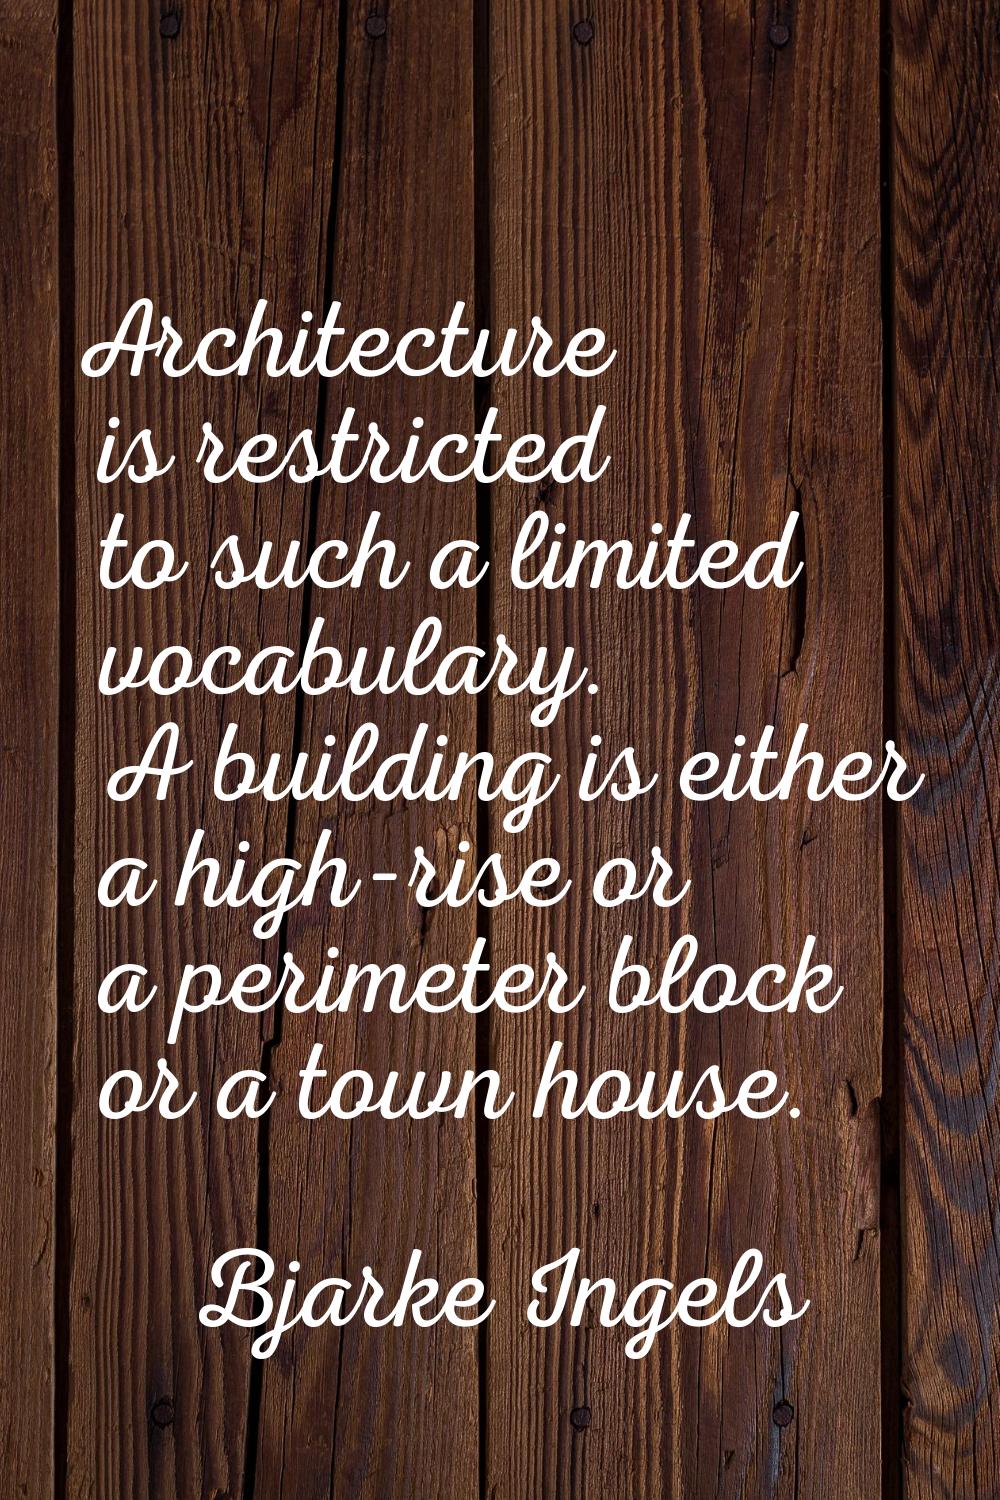 Architecture is restricted to such a limited vocabulary. A building is either a high-rise or a peri